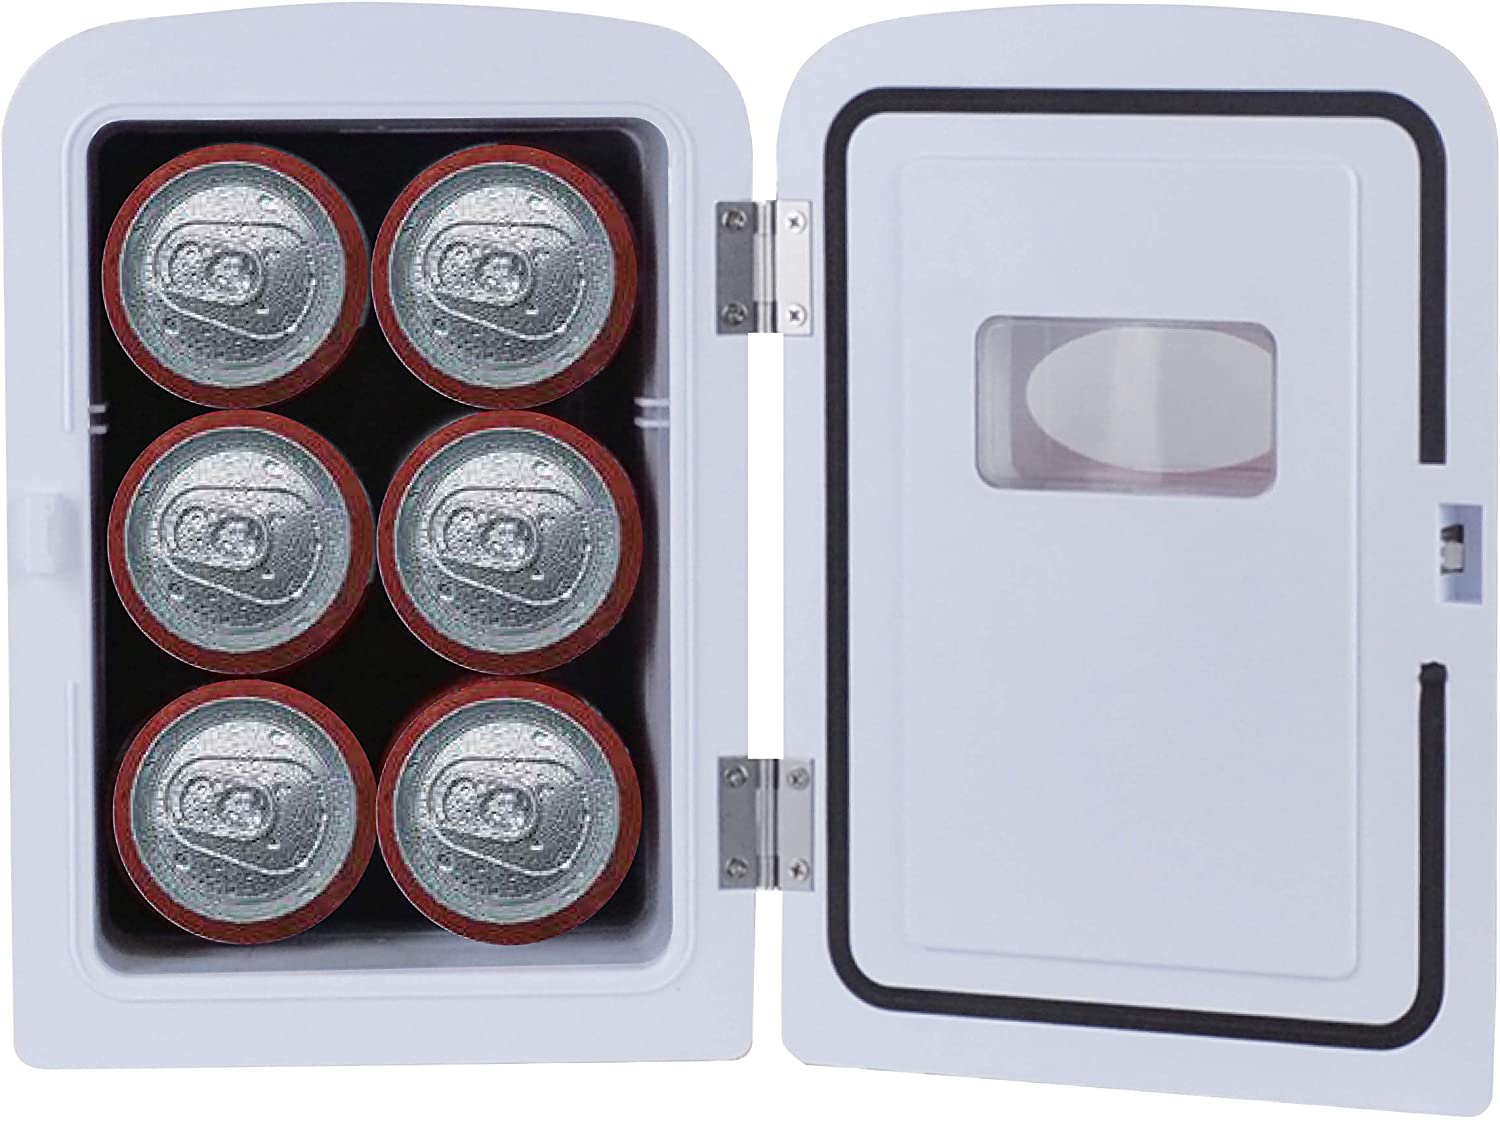 3 CURTIS MIS135DRP DR. Pepper Mini Portable Compact Personal Fridge Cools & Heats, 4 Liter Capacity, 6 Cans, Makeup, Skincare, Freon-Free & Eco Friendly, Includes Home Plug & 12V Car Charger, MAROON